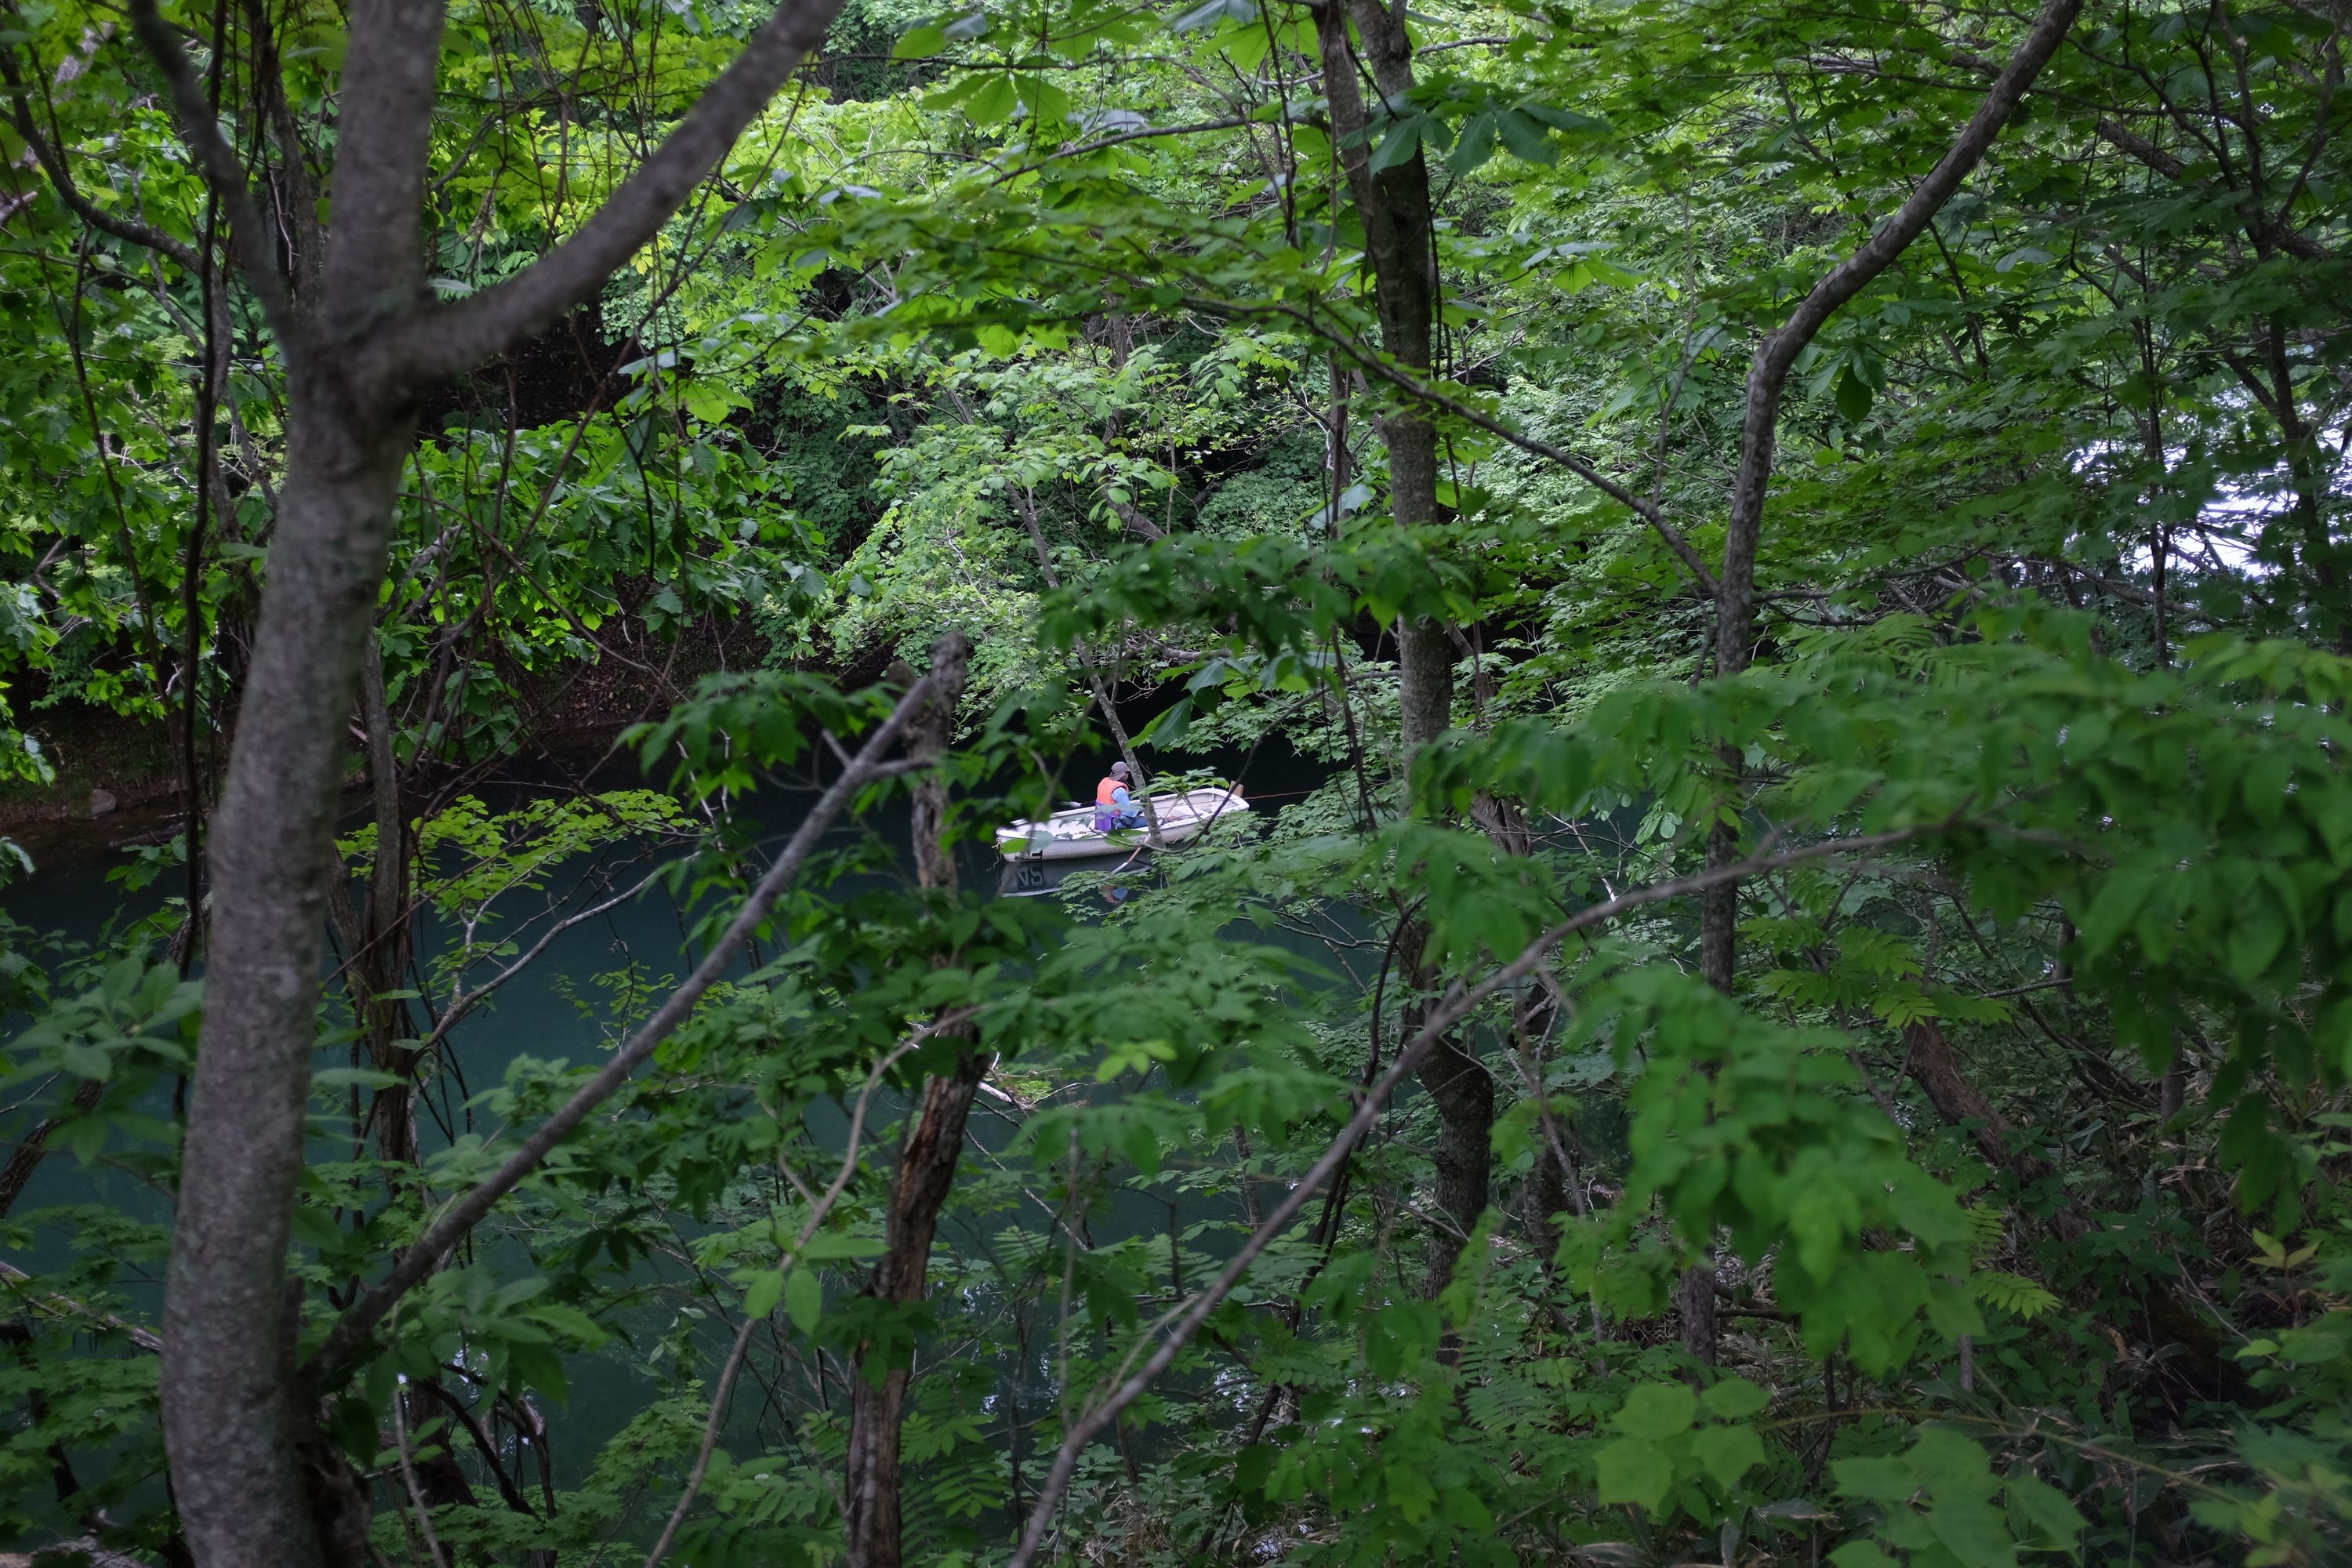 A man sits in a fishing boat as seen through a thick forest.